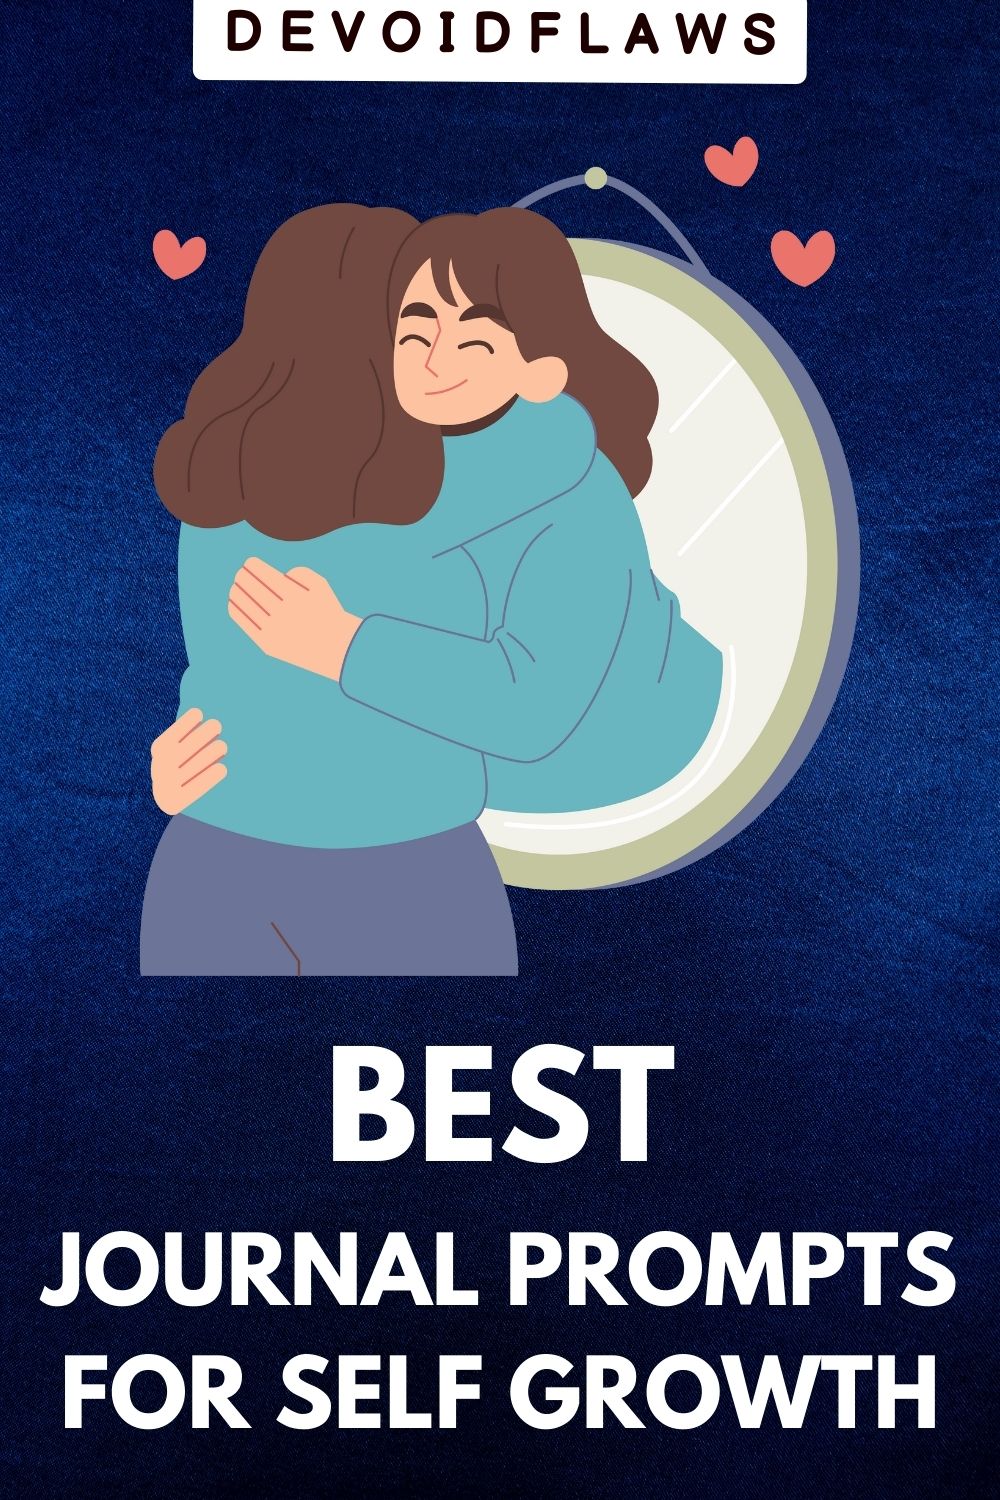 image with text - best journal prompts for self growth